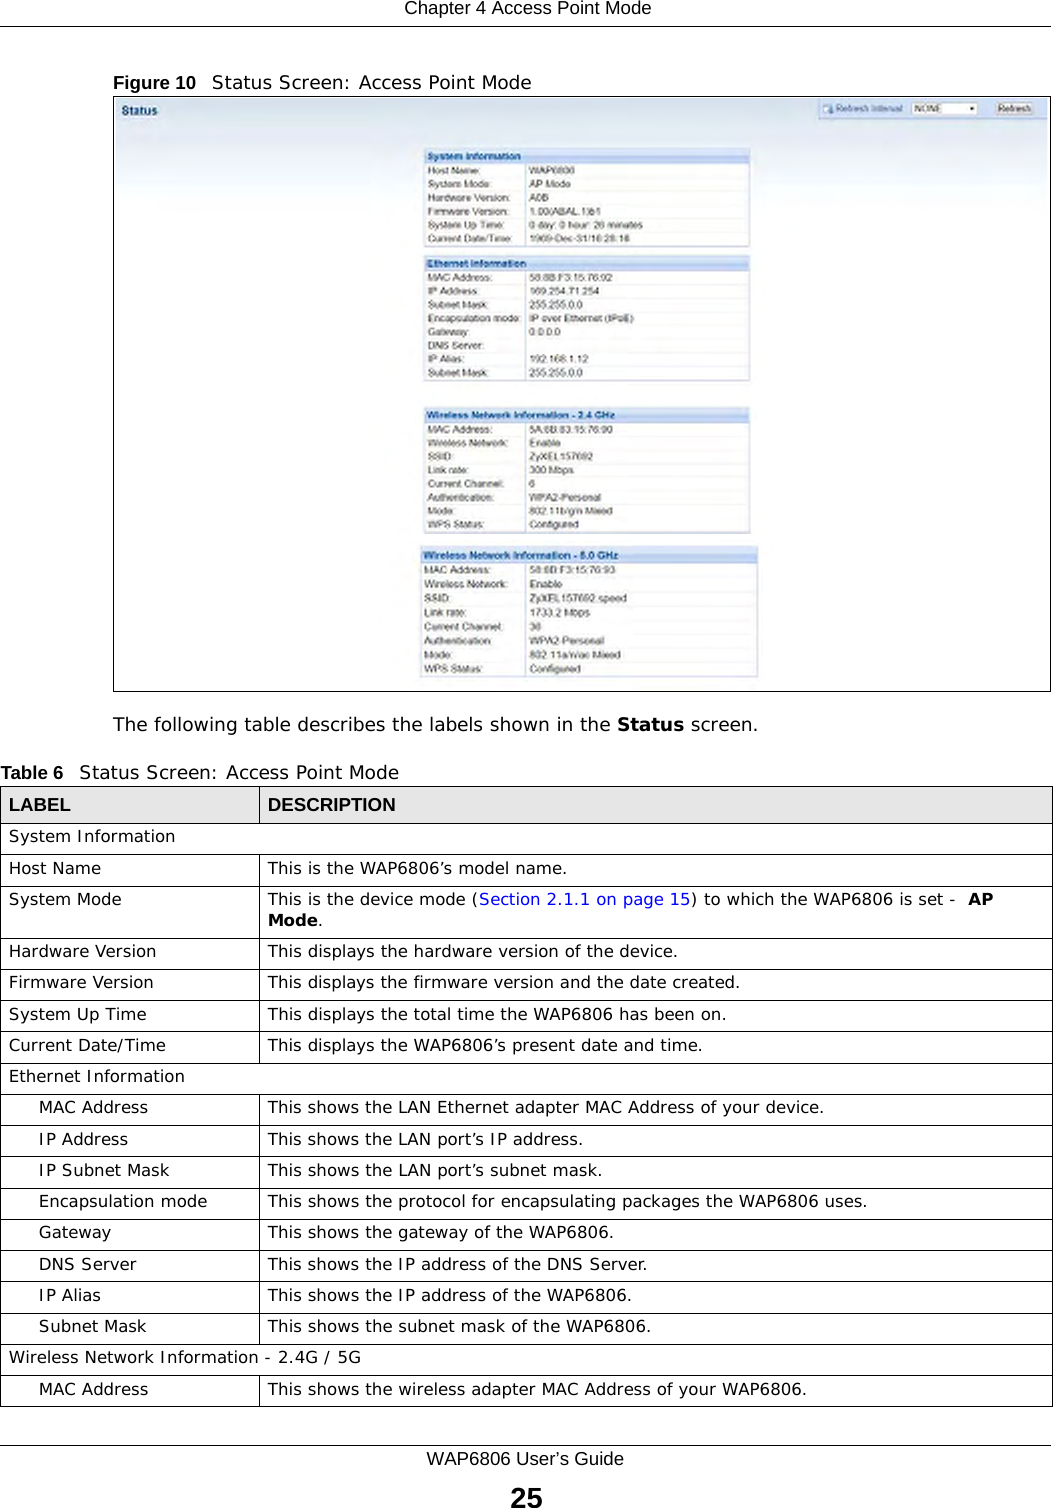  Chapter 4 Access Point ModeWAP6806 User’s Guide25Figure 10   Status Screen: Access Point Mode The following table describes the labels shown in the Status screen.Table 6   Status Screen: Access Point ModeLABEL DESCRIPTIONSystem InformationHost Name This is the WAP6806’s model name.System Mode This is the device mode (Section 2.1.1 on page 15) to which the WAP6806 is set -  AP Mode.Hardware Version This displays the hardware version of the device.Firmware Version This displays the firmware version and the date created. System Up Time This displays the total time the WAP6806 has been on.Current Date/Time This displays the WAP6806’s present date and time.Ethernet InformationMAC Address This shows the LAN Ethernet adapter MAC Address of your device.IP Address This shows the LAN port’s IP address.IP Subnet Mask This shows the LAN port’s subnet mask.Encapsulation mode This shows the protocol for encapsulating packages the WAP6806 uses.Gateway This shows the gateway of the WAP6806.DNS Server This shows the IP address of the DNS Server.IP Alias This shows the IP address of the WAP6806.Subnet Mask This shows the subnet mask of the WAP6806.Wireless Network Information - 2.4G / 5GMAC Address This shows the wireless adapter MAC Address of your WAP6806.